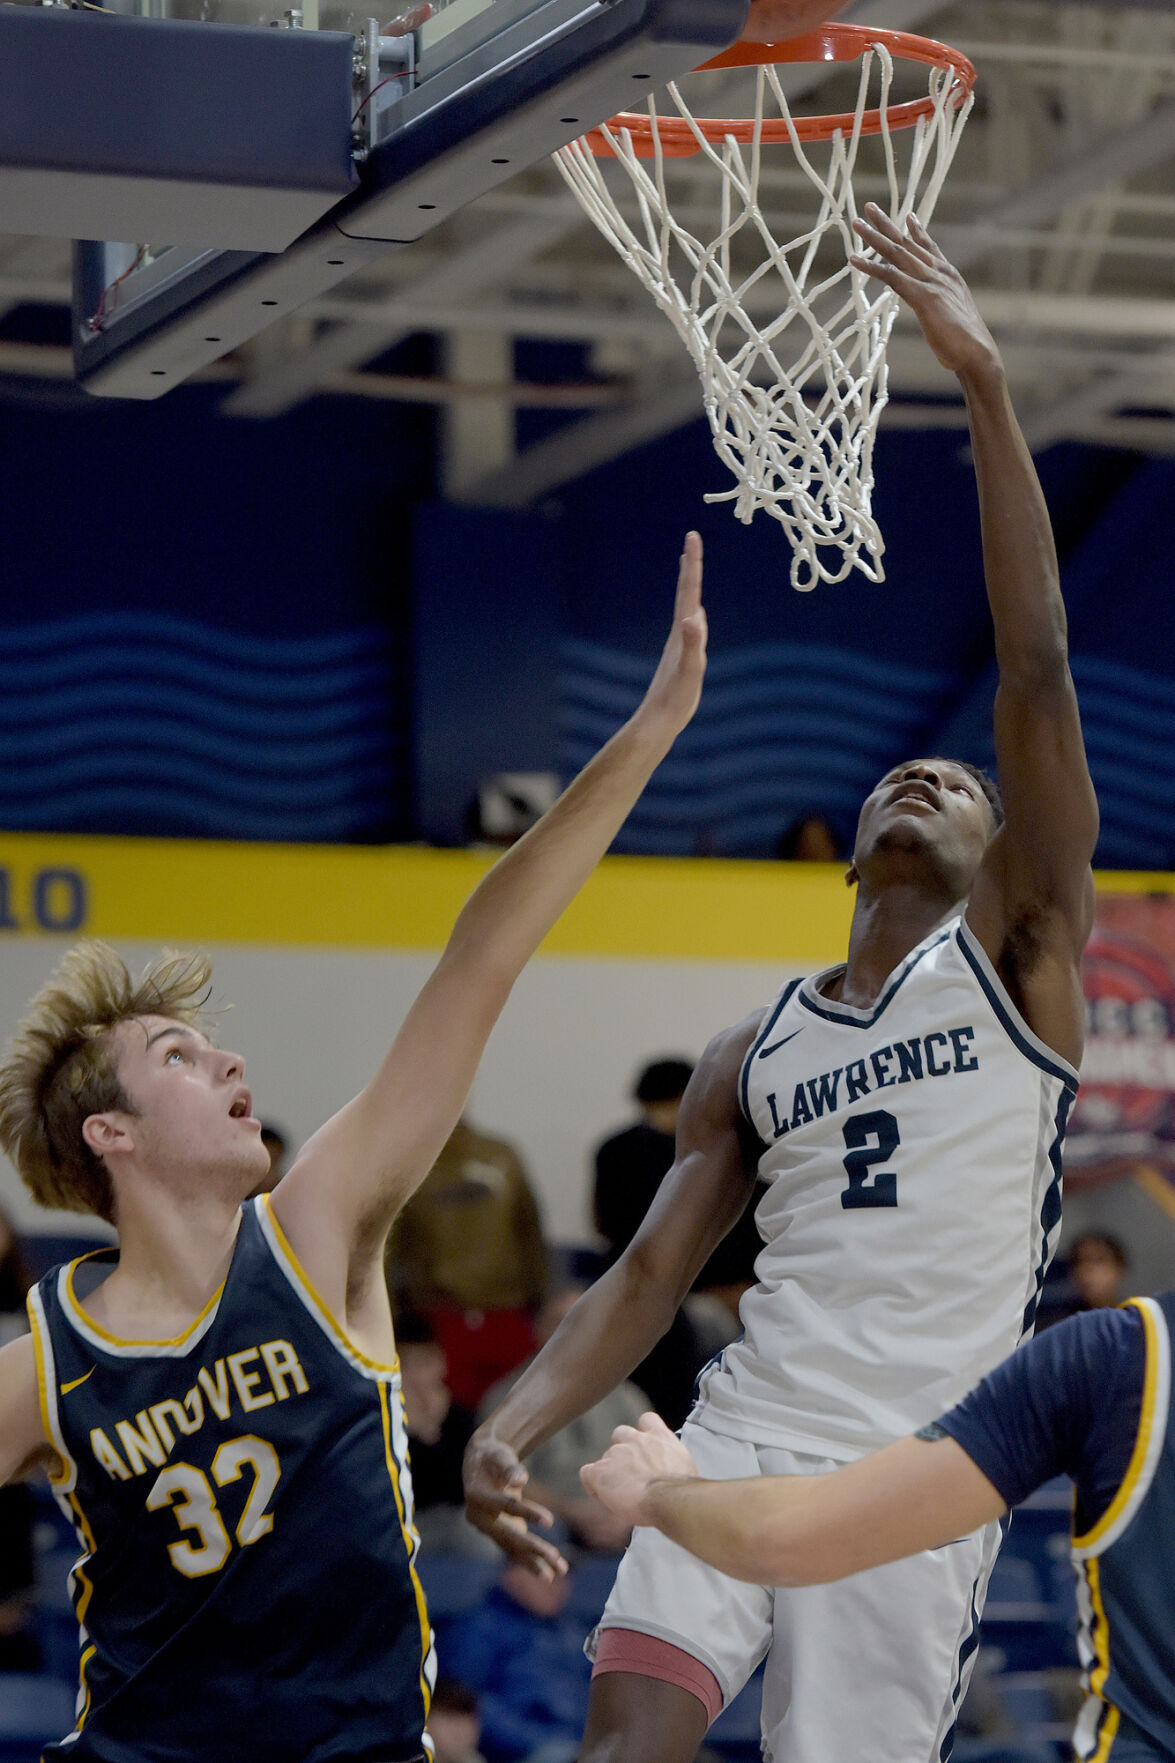 Lawrence Boys Basketball Team Secures Bounce-Back Win, Other Teams Triumph in Friday’s Games